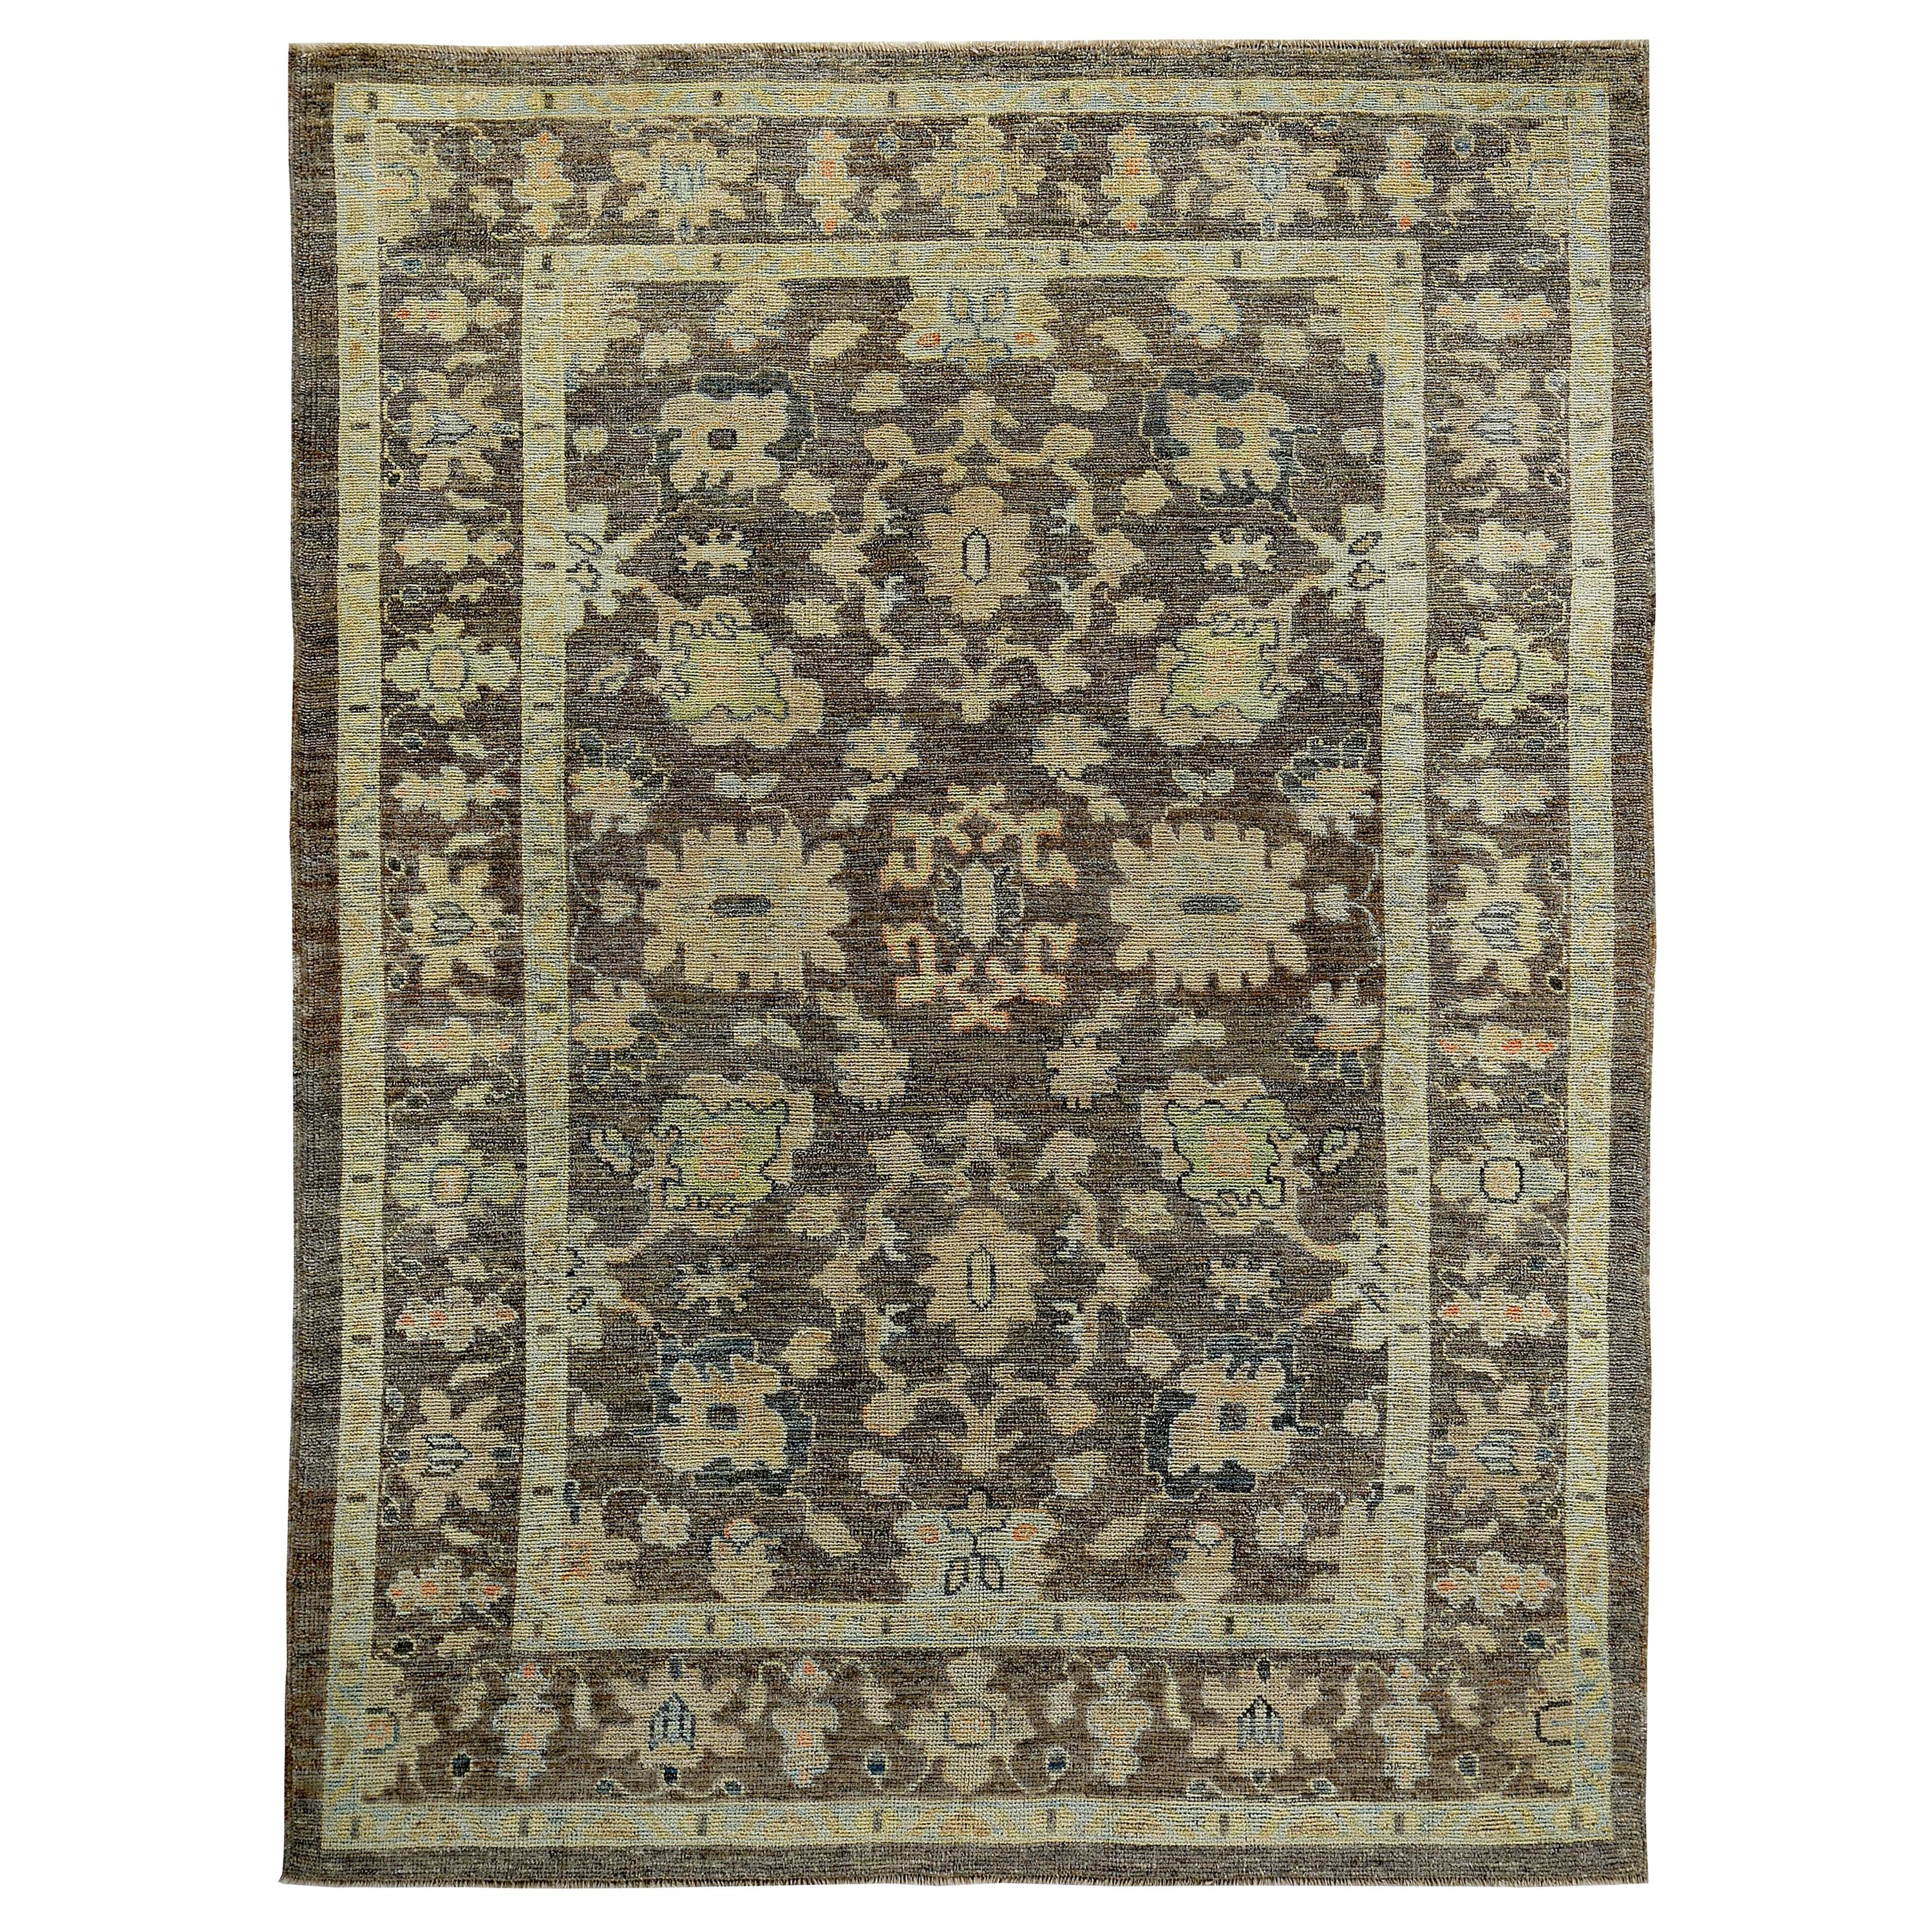 Turkish Oushak Rug with Green, Blue and Beige Flower Heads on Brown Field